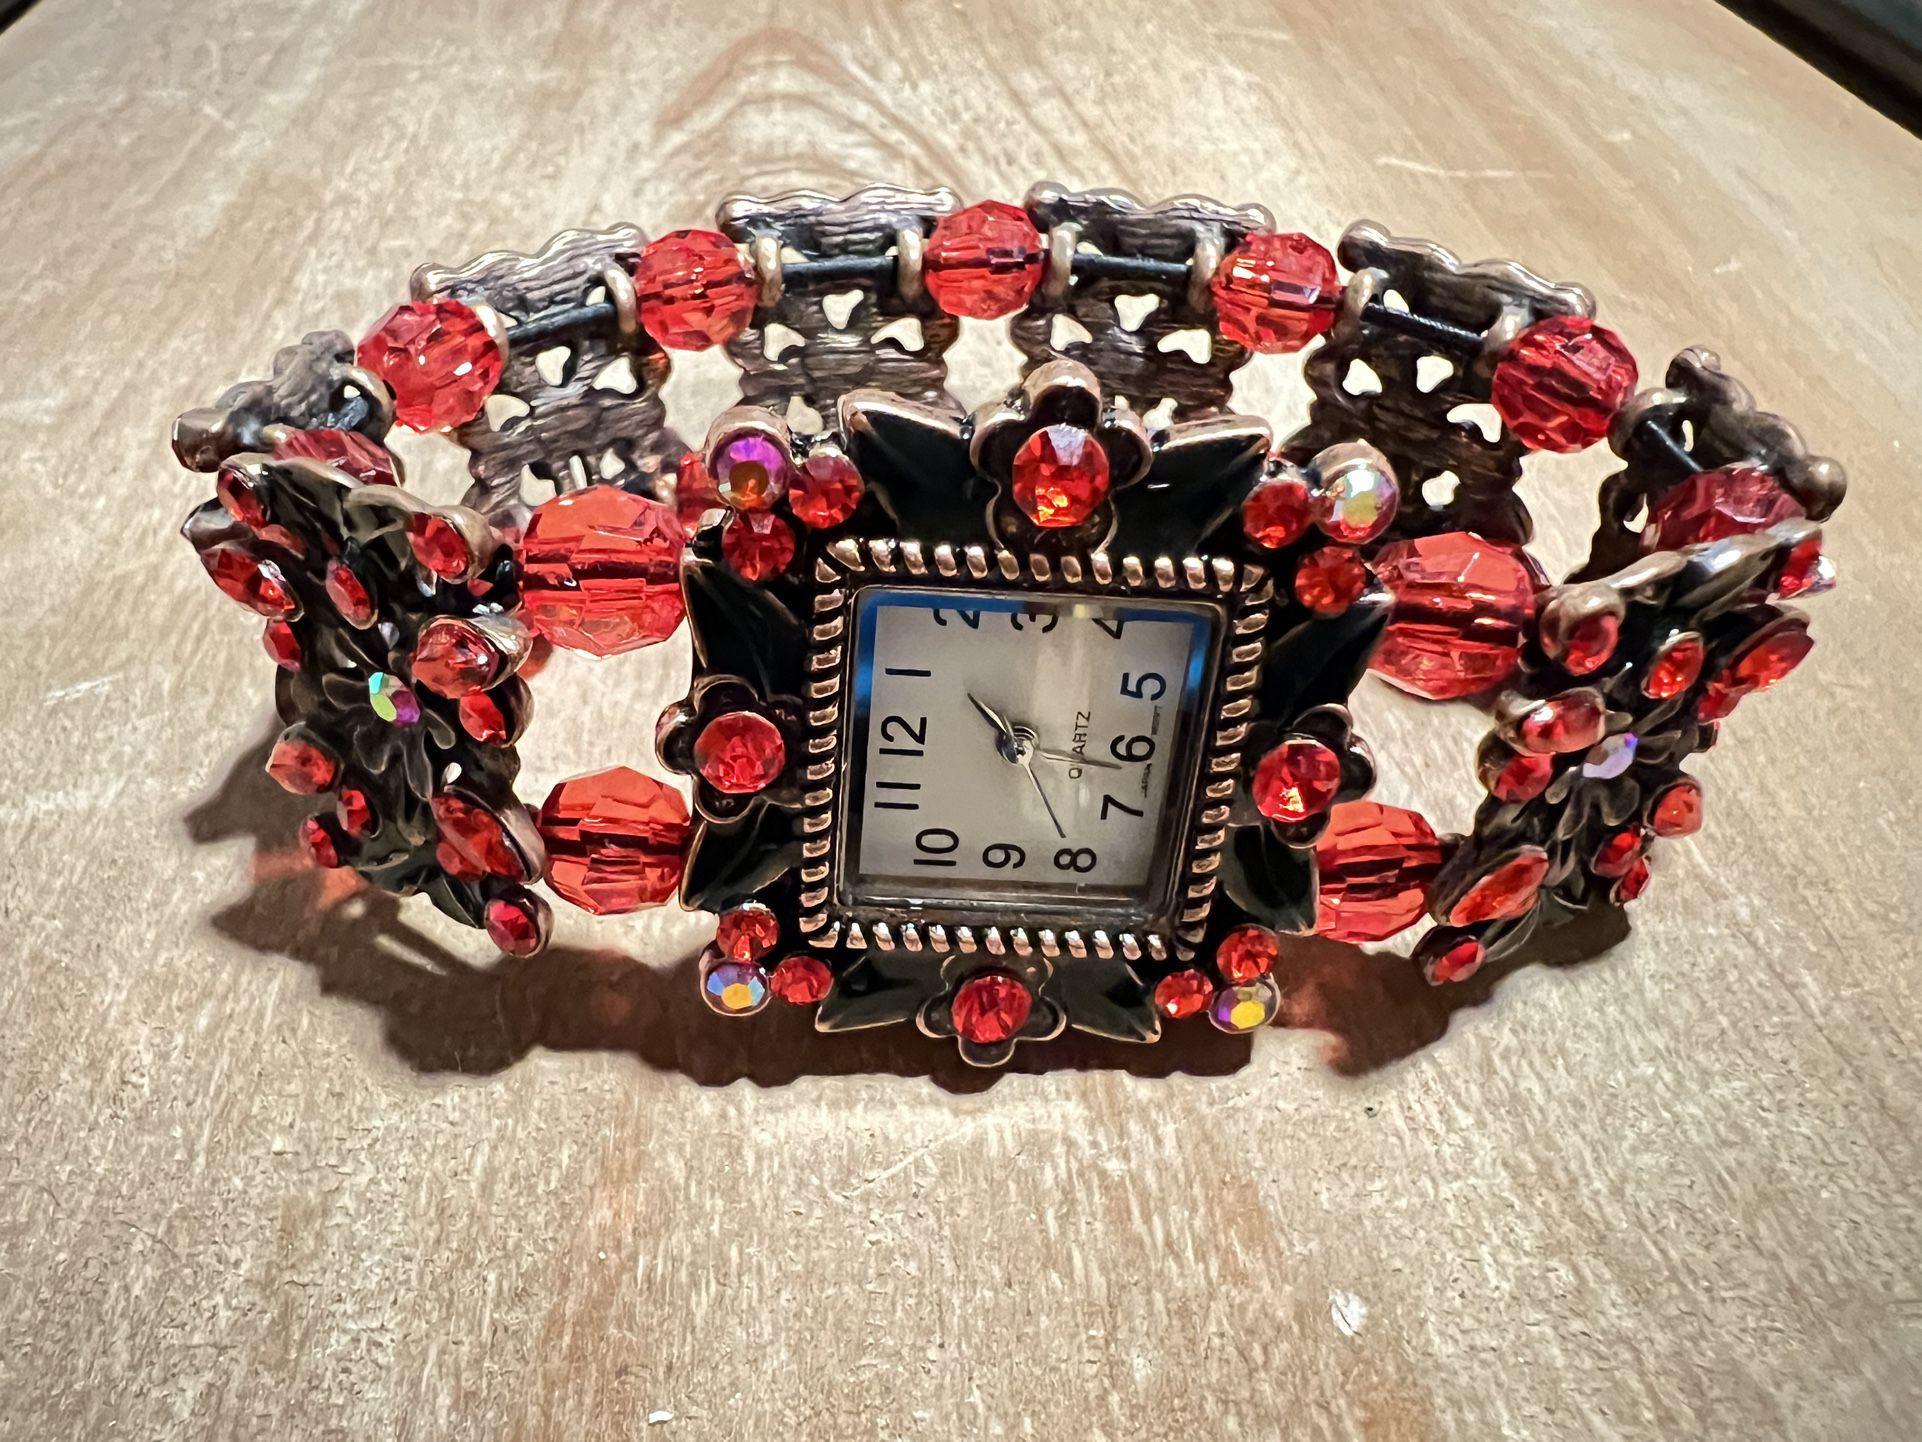 Watch vintage  Gorgeous Vintage Beaded Stretch Watch The battery works  It’s missing a stone, details in the photo